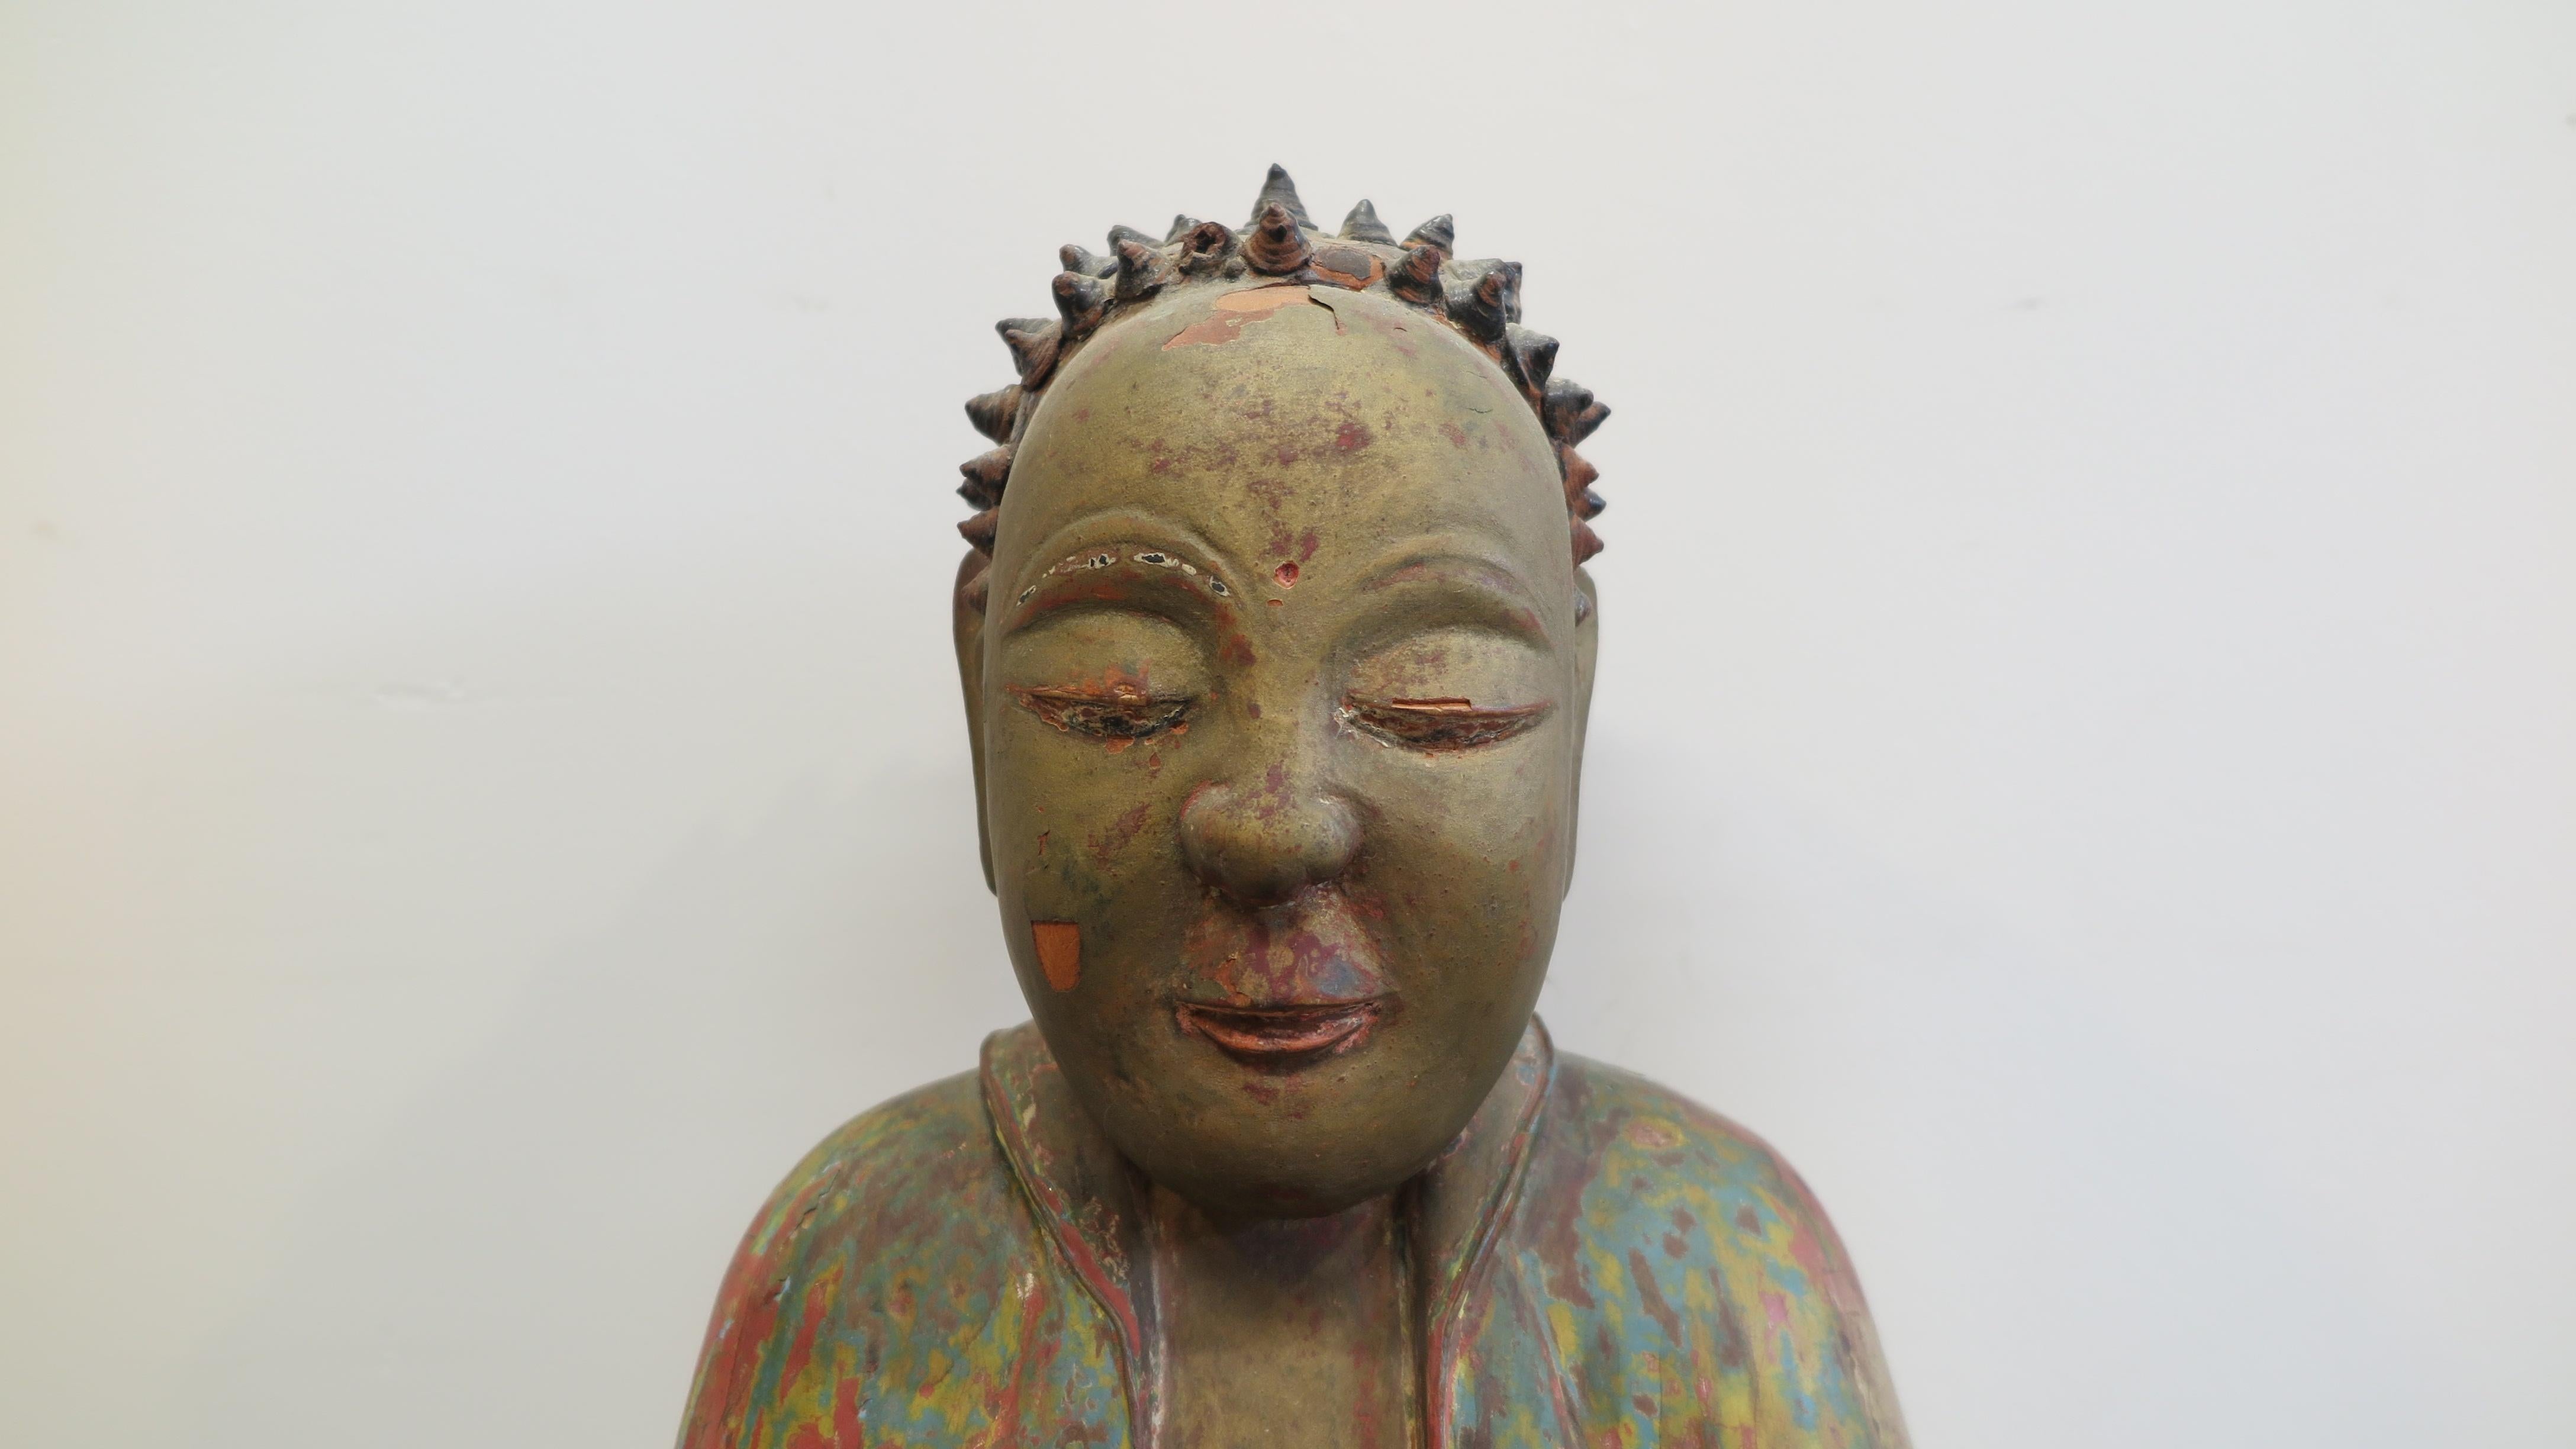 18th century Carved Wood Buddha. Chinese antique Buddha Statue of carved wood. Gesso like coating to wooden surface, with pigments and gilding. Dry Lacquer conical hand formed cones to the head representing the hair of the Buddha, with loss as